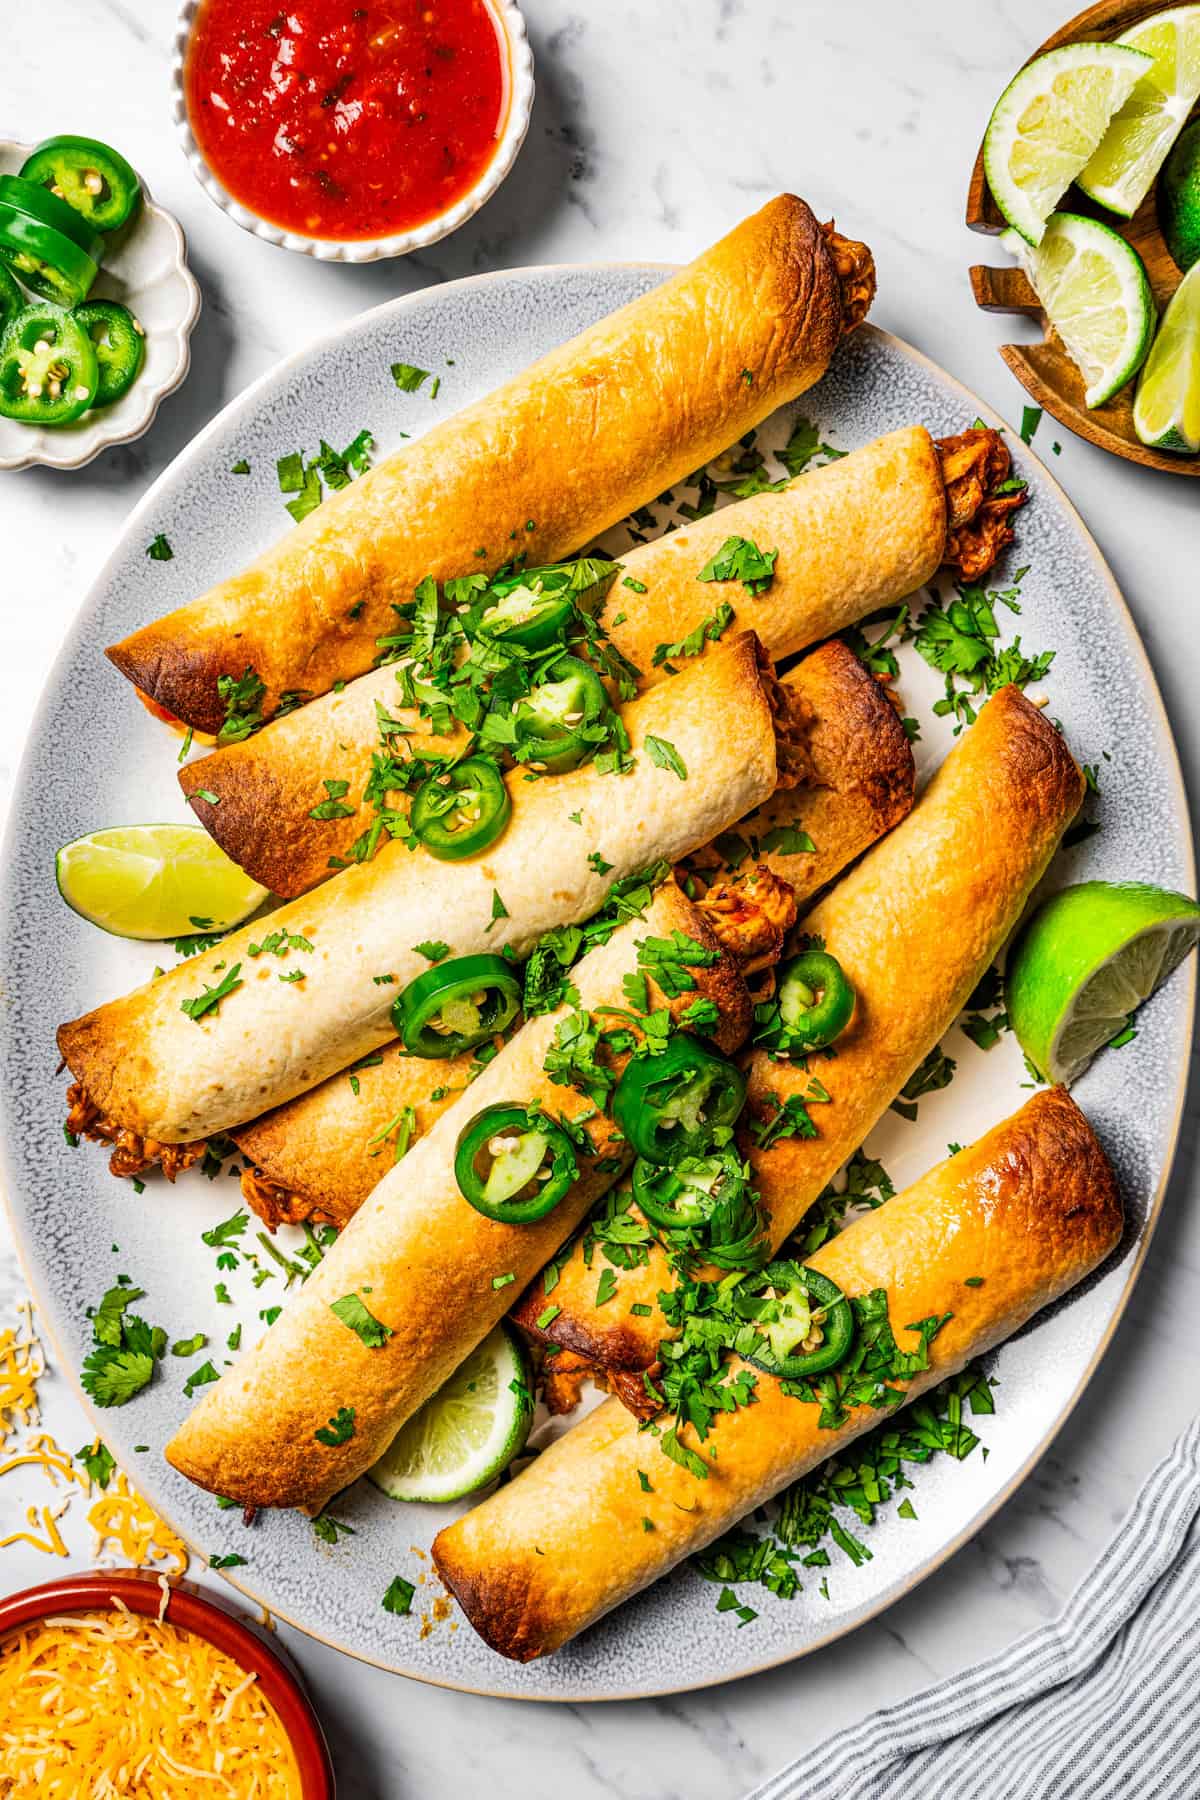 Overhead view of crispy chicken flautas on a round platter, garnished with lime wedges, sliced jalapeños, and fresh cilantro, surrounded by small bowls with more garnishes.